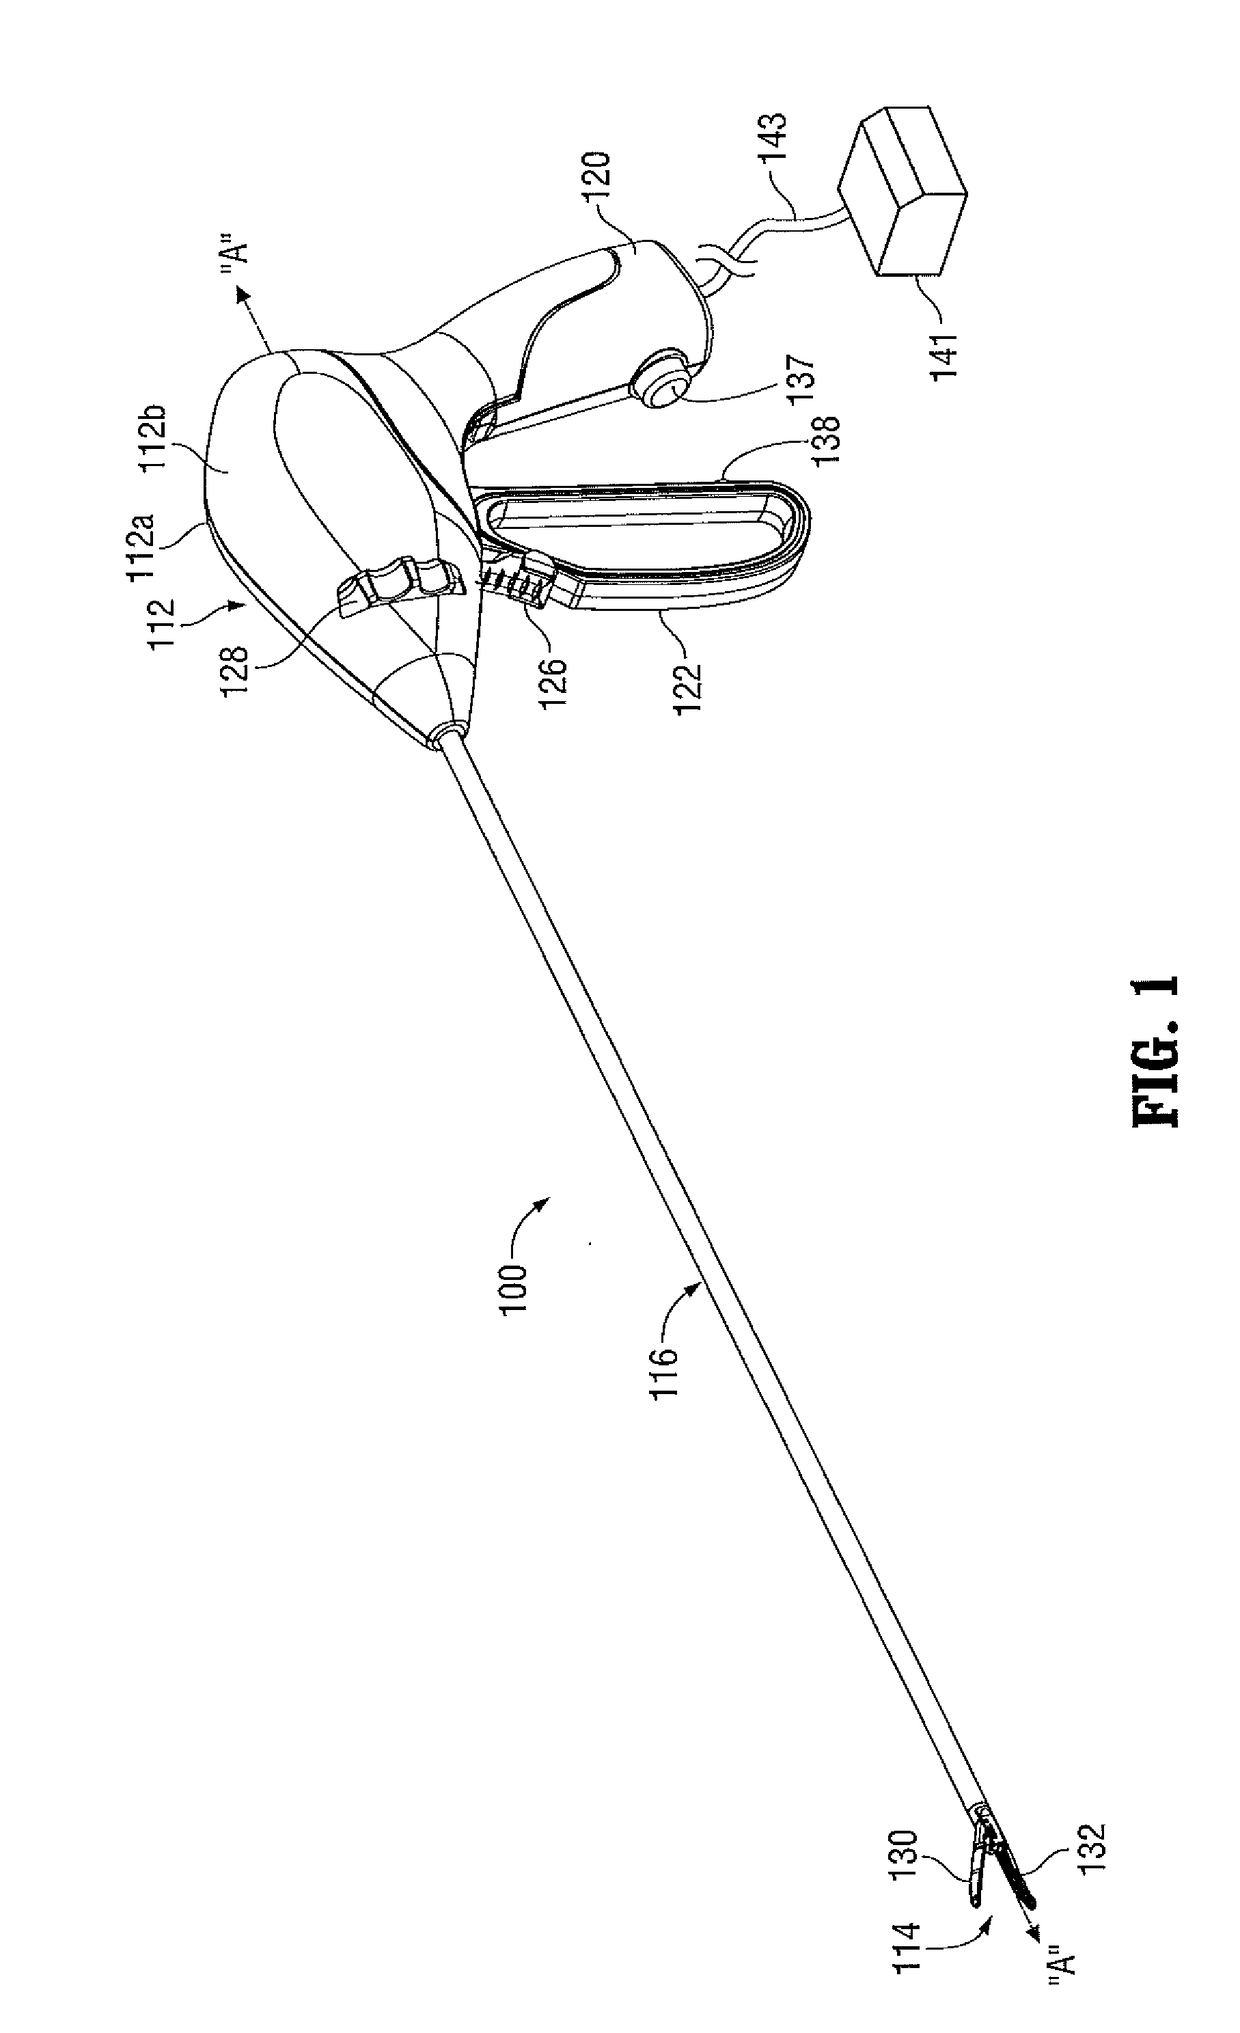 Surgical instrument with system and method for springing open jaw members